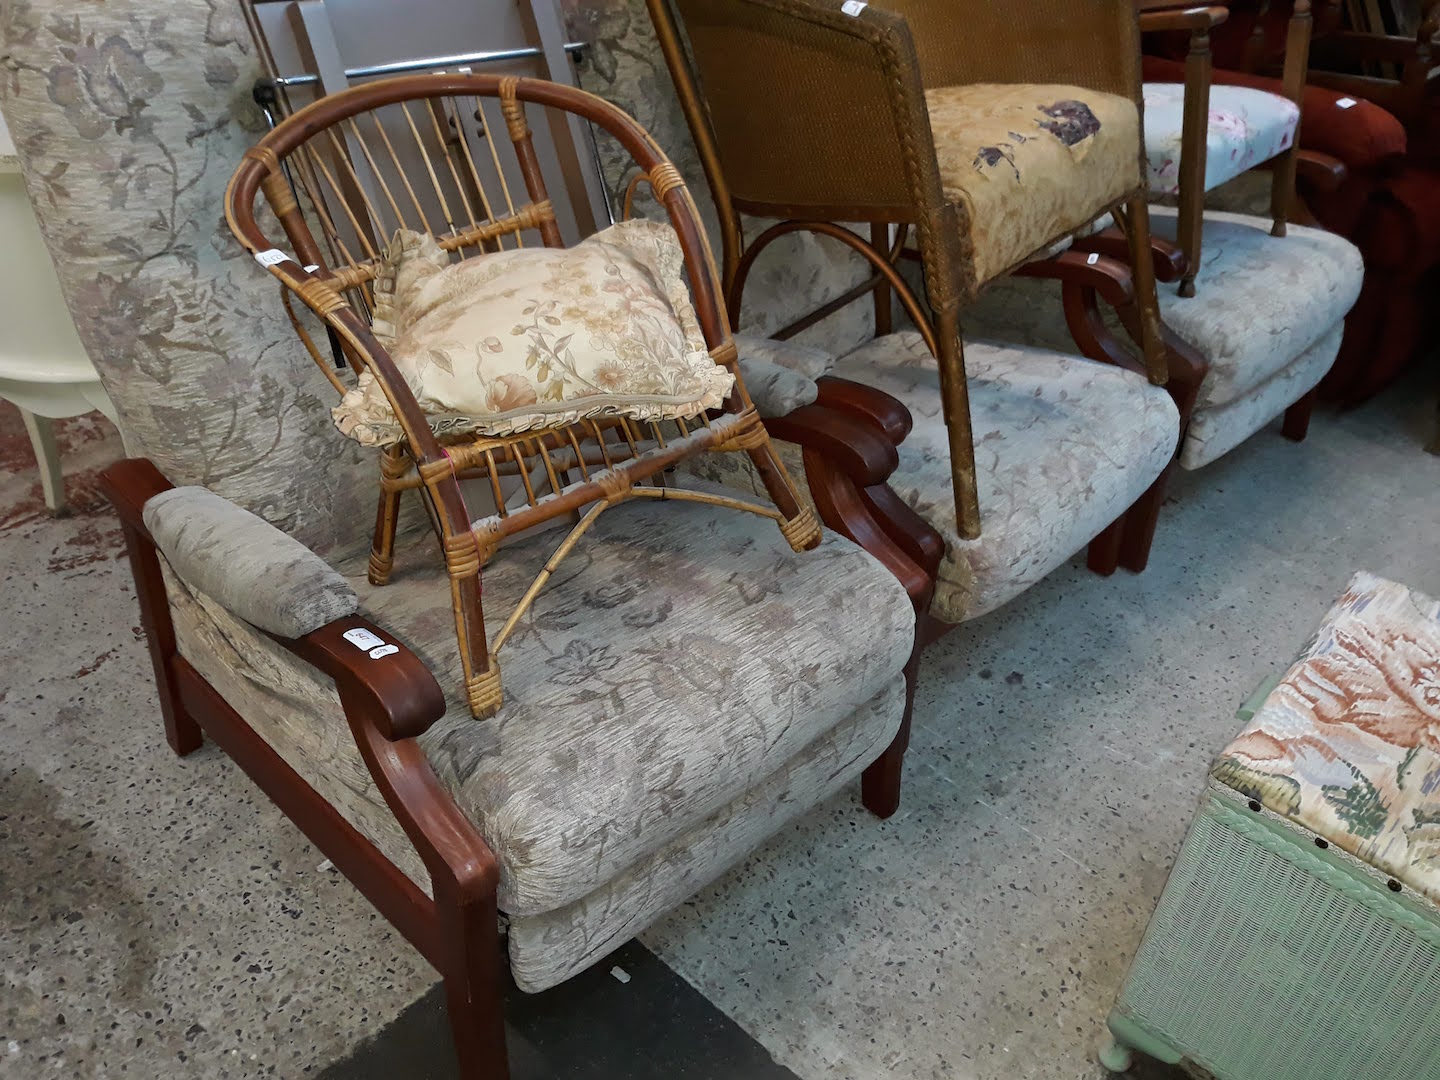 3 wood show and fawn floral patterned armchairs